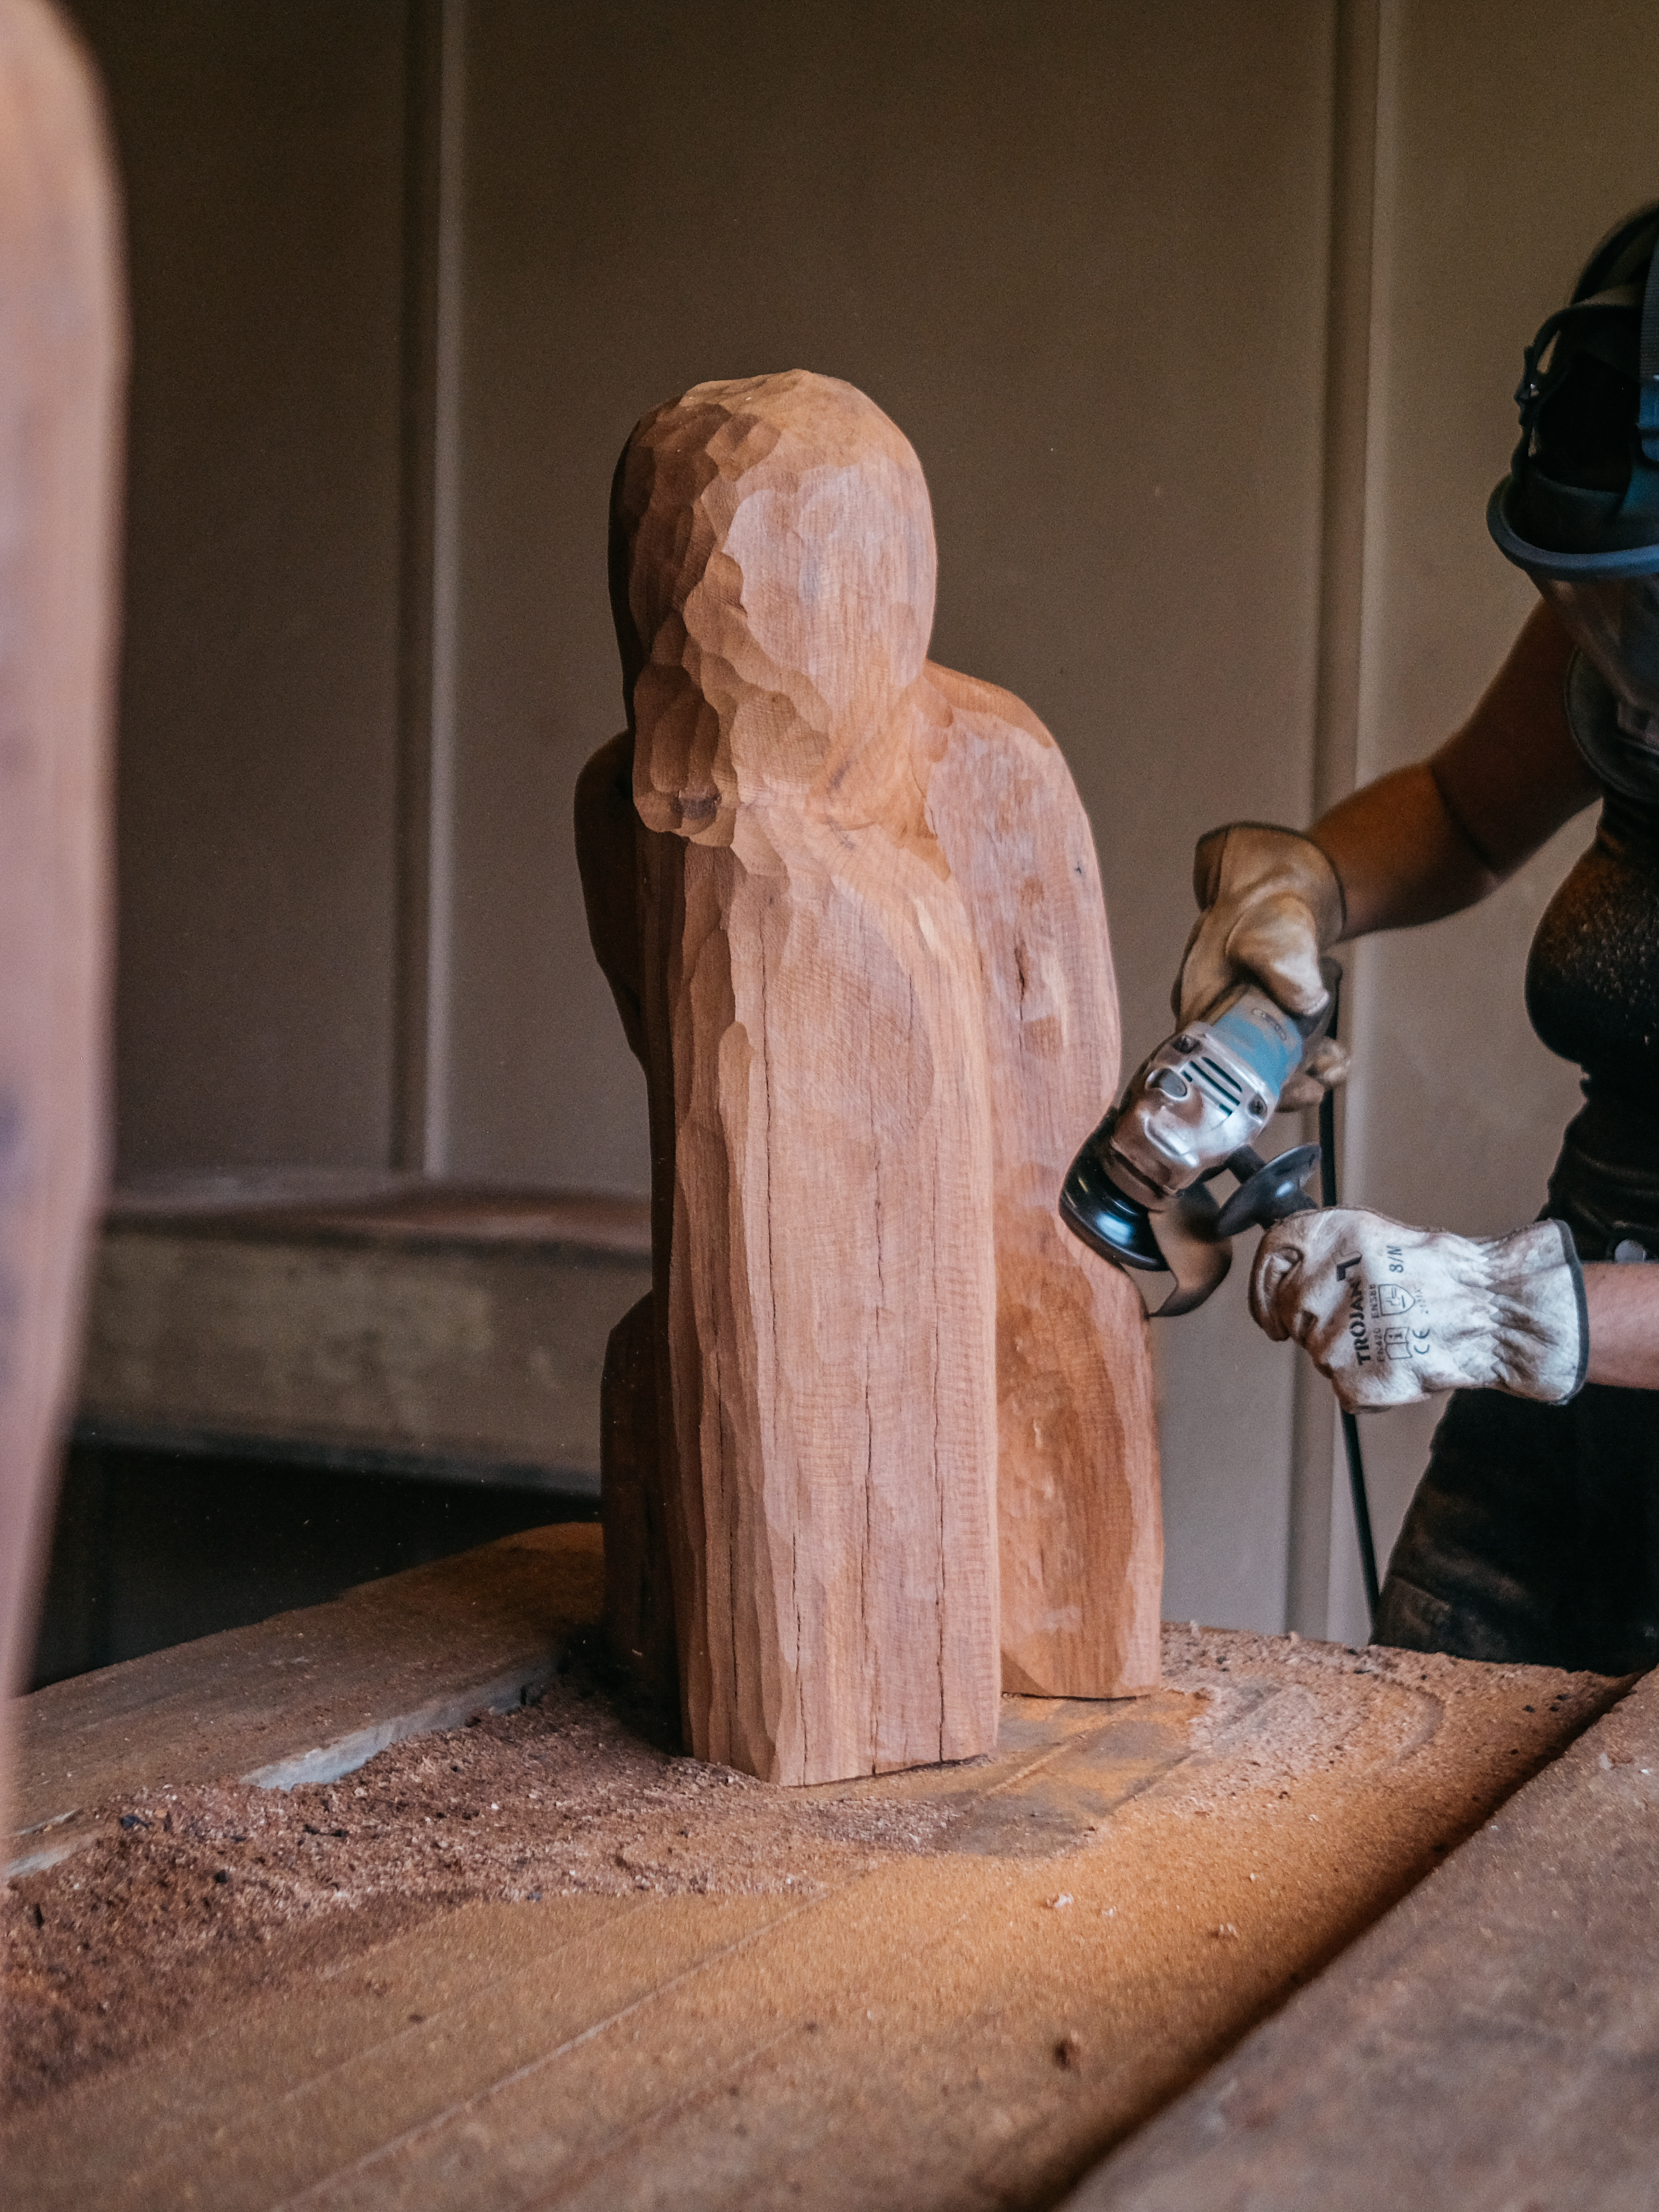 The artist uses a carving tool to shape a medium-sized piece of wood